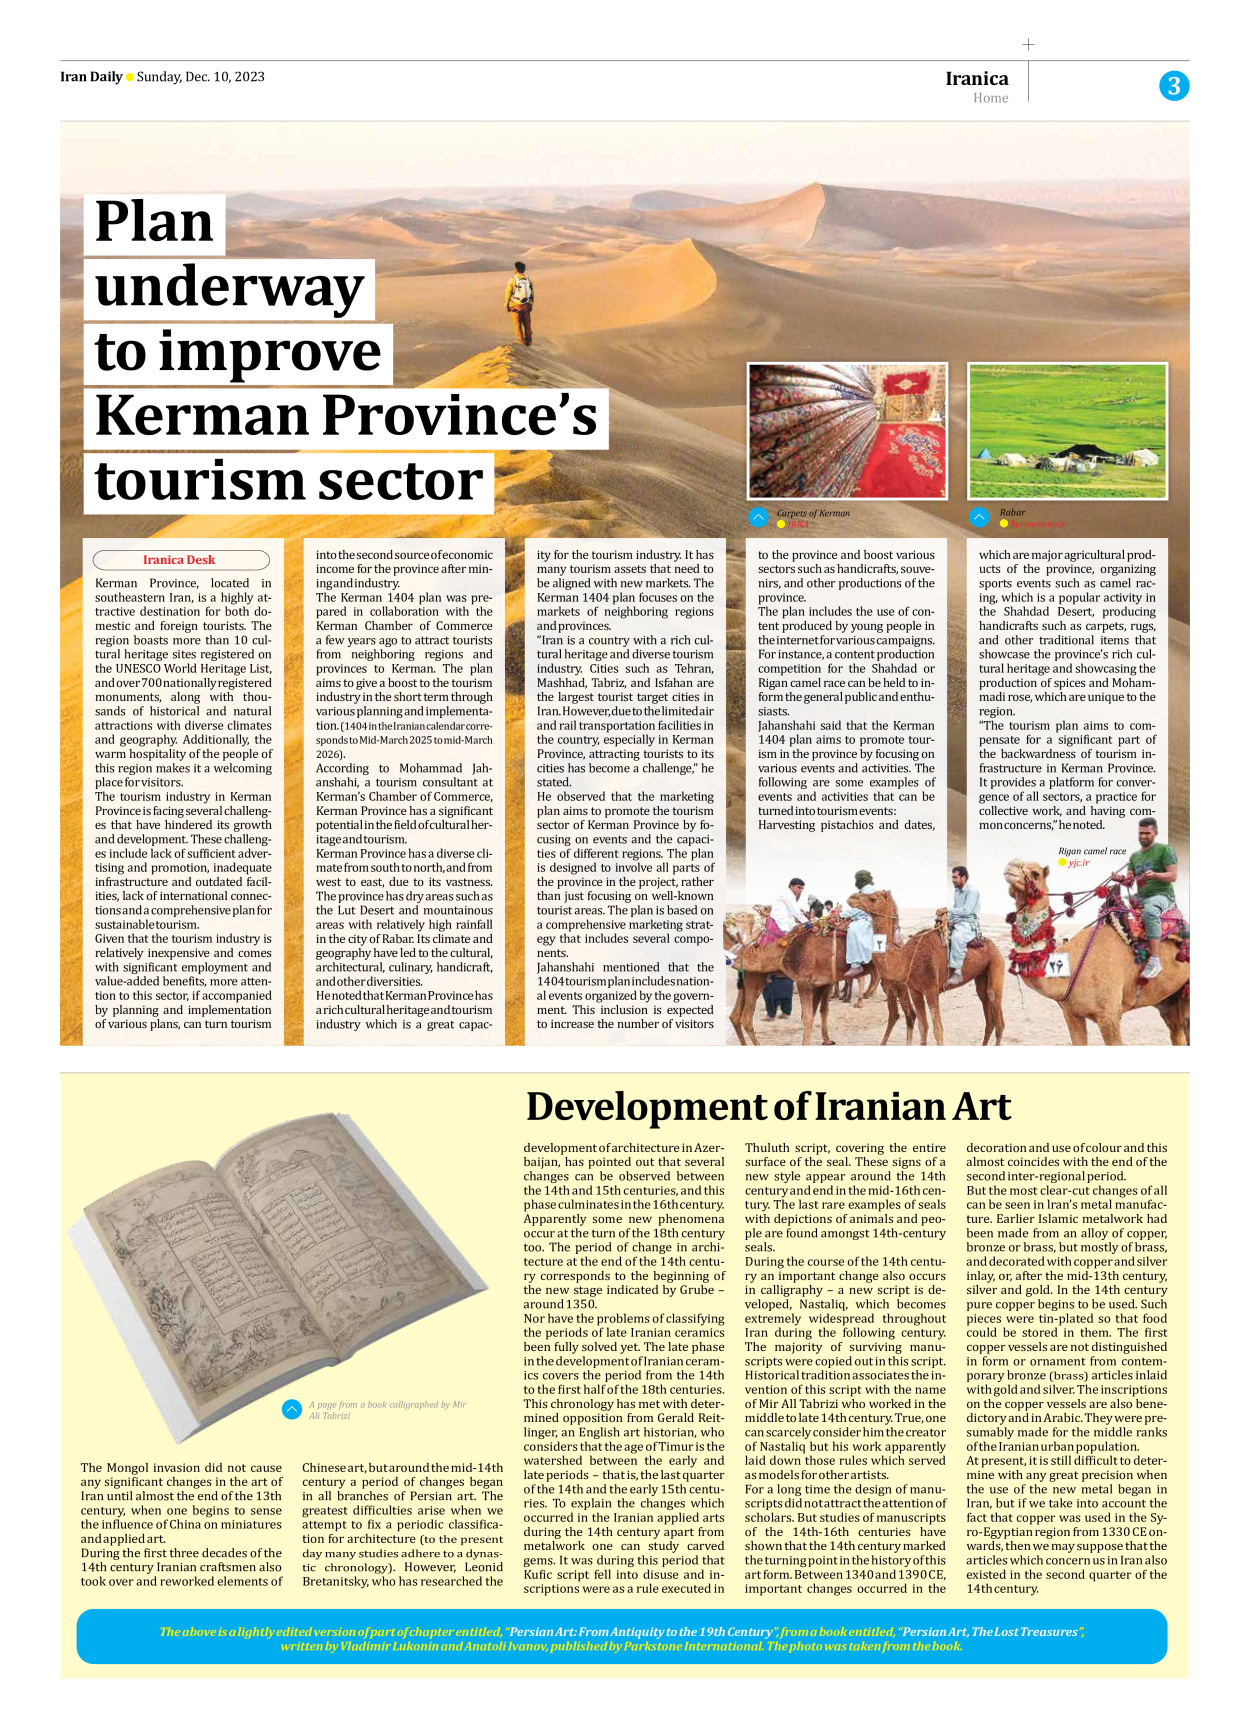 Iran Daily - Number Seven Thousand Four Hundred and Fifty Six - 10 December 2023 - Page 3